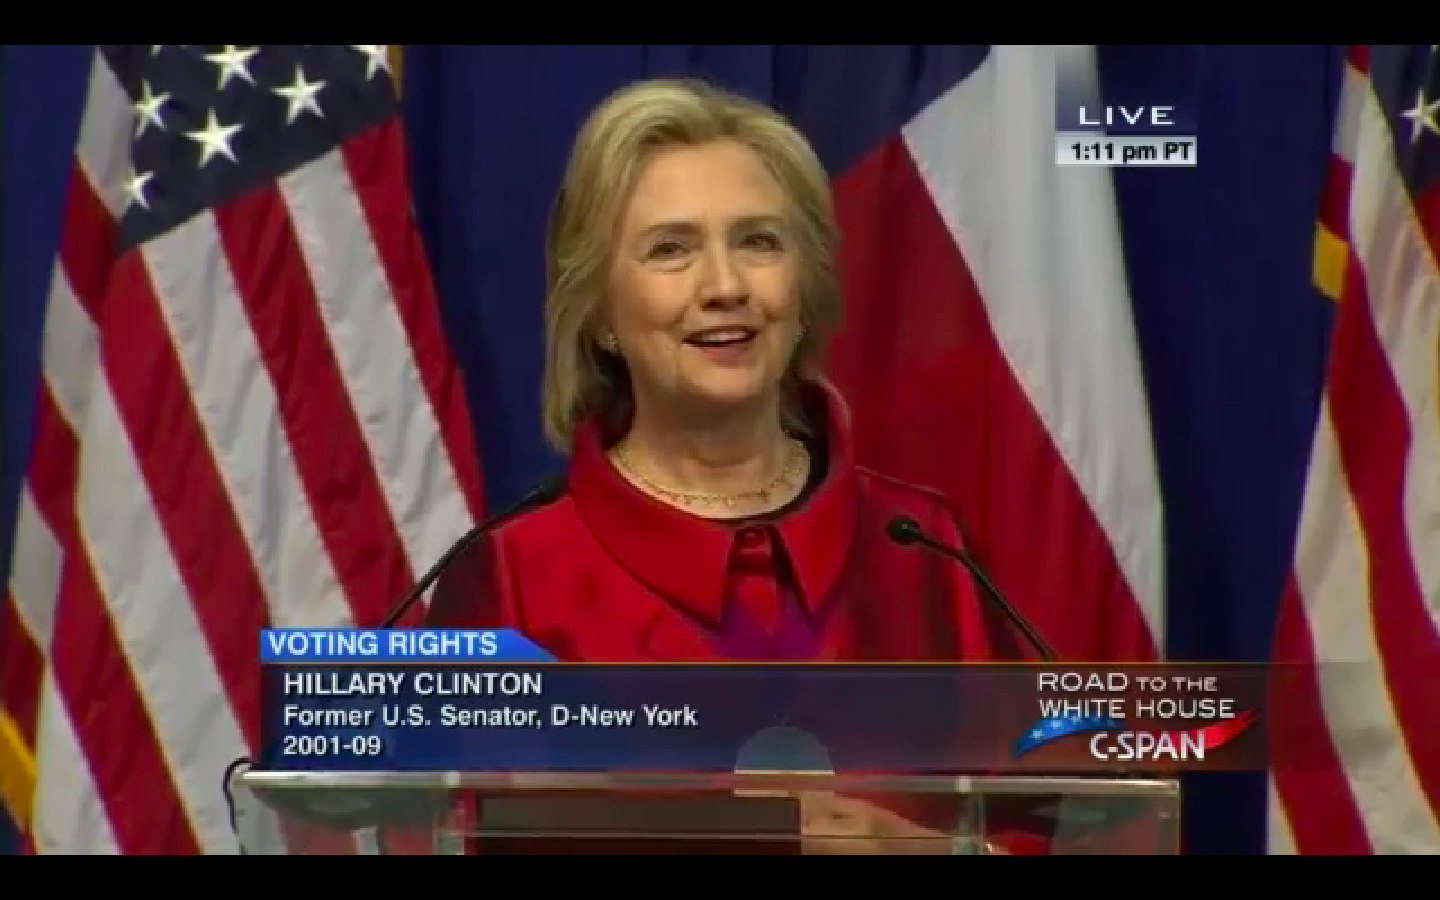 Hillary Clinton speaks on voting rights